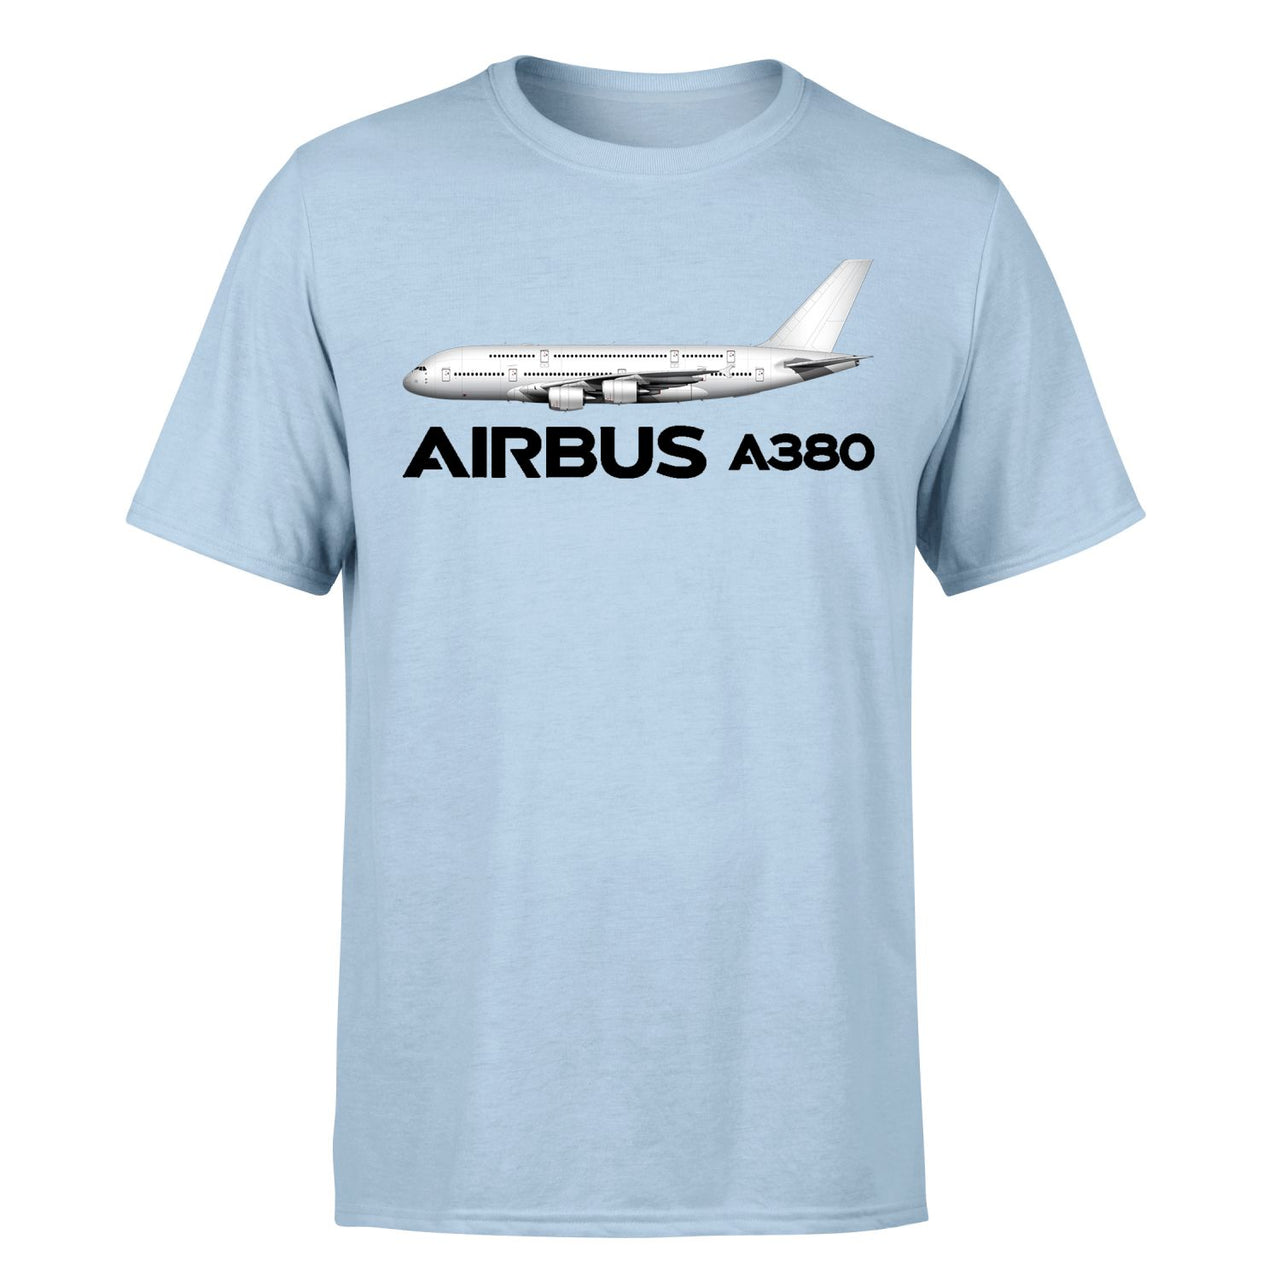 The Airbus A380 Designed T-Shirts